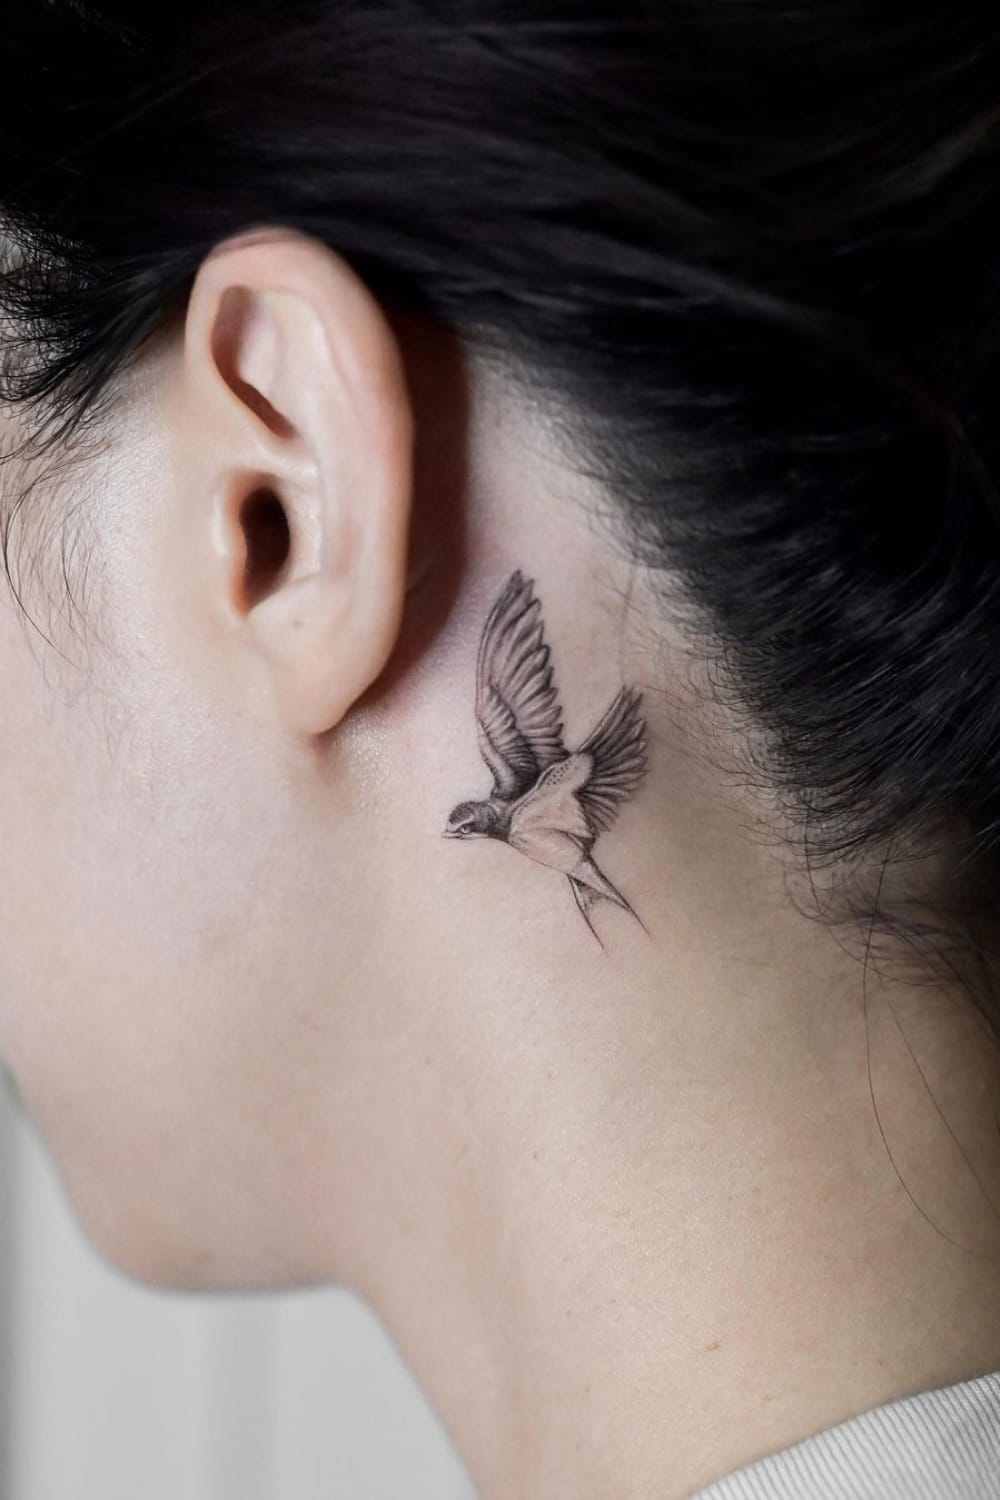 Swallow Tattoo Behind the Ear